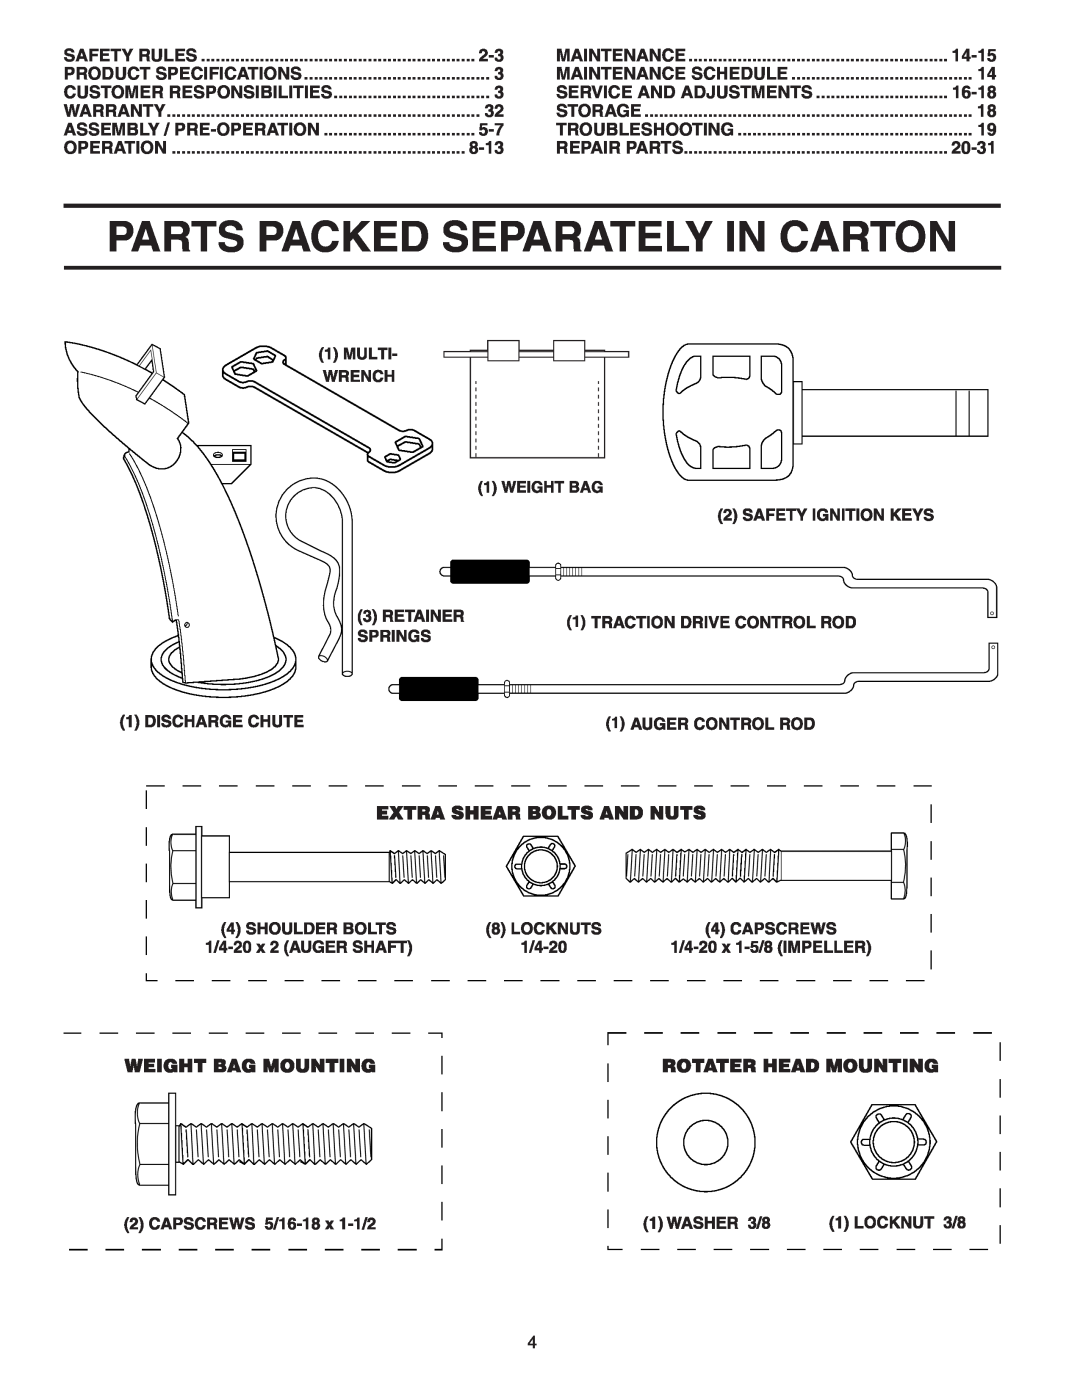 Poulan PP5524ESA owner manual Parts Packed Separately In Carton, 8-13, 14-15, Service And Adjustments, 16-18, 20-31 